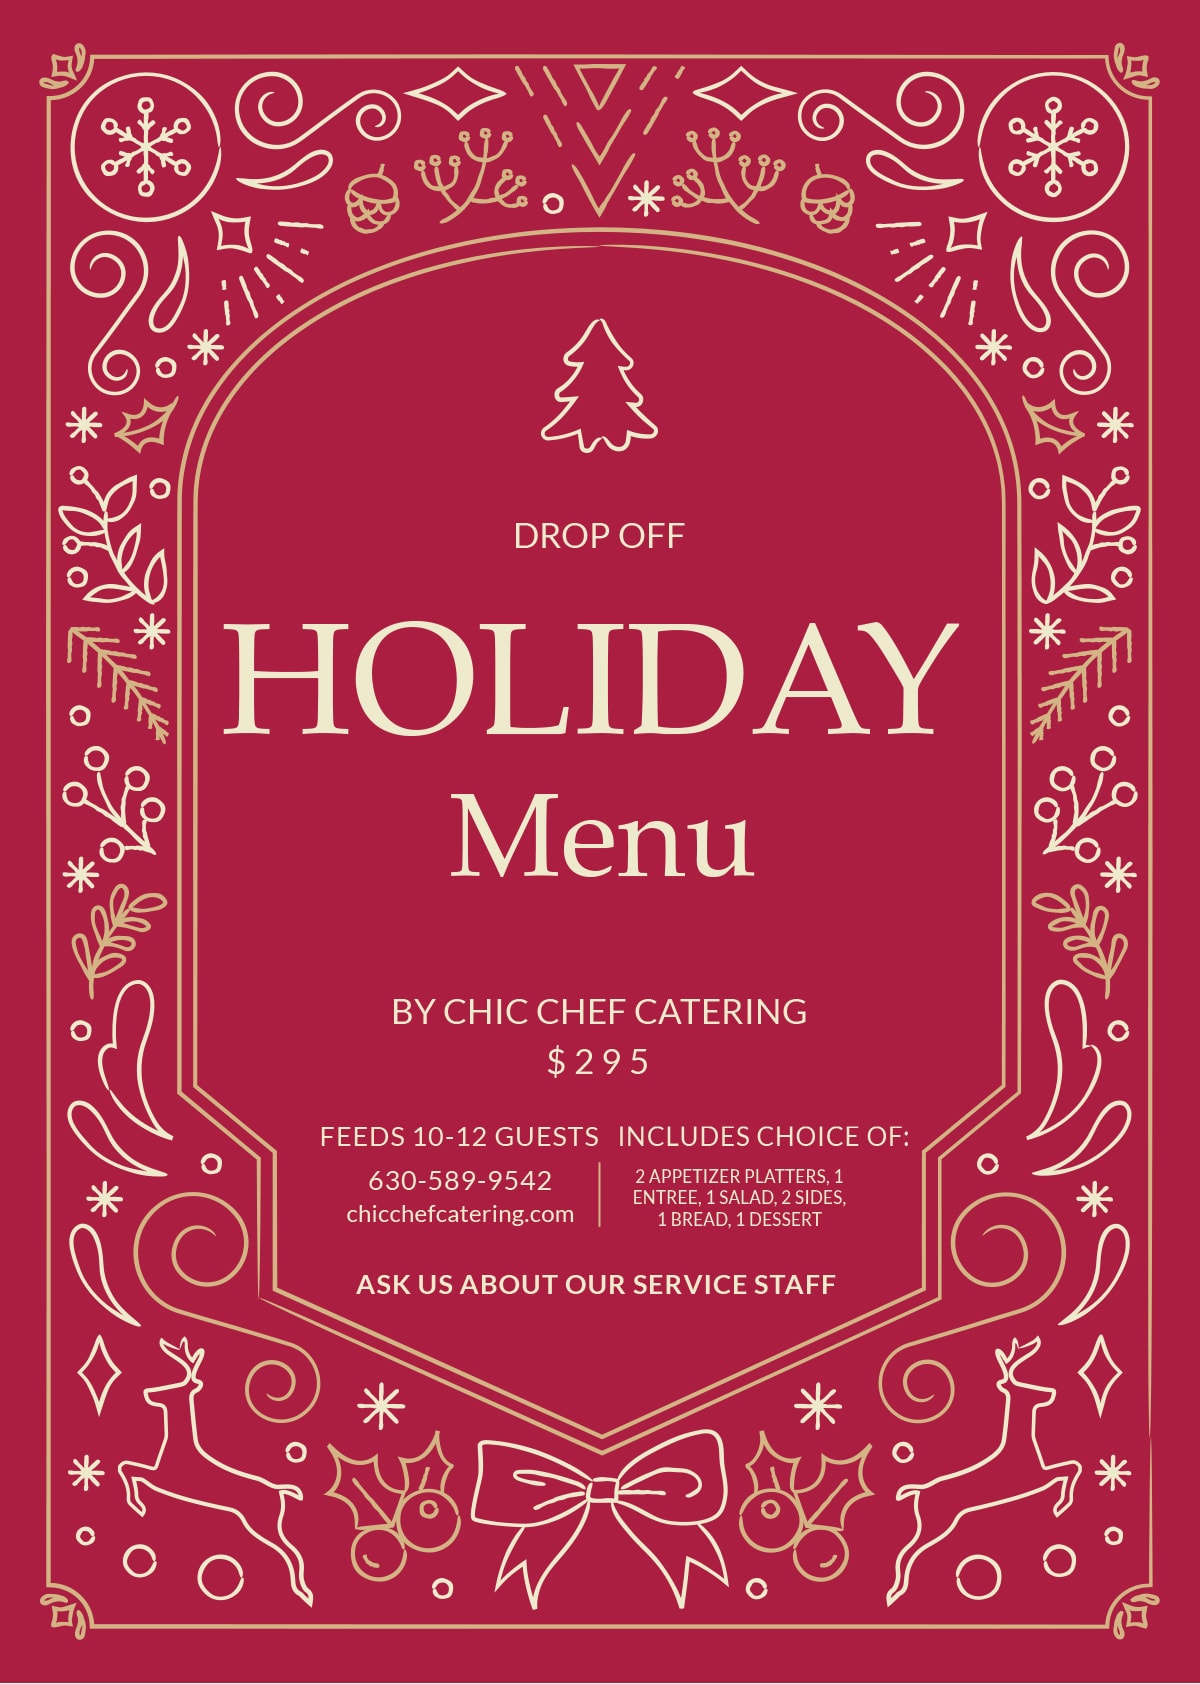 Chic Chef Catering Holiday menu